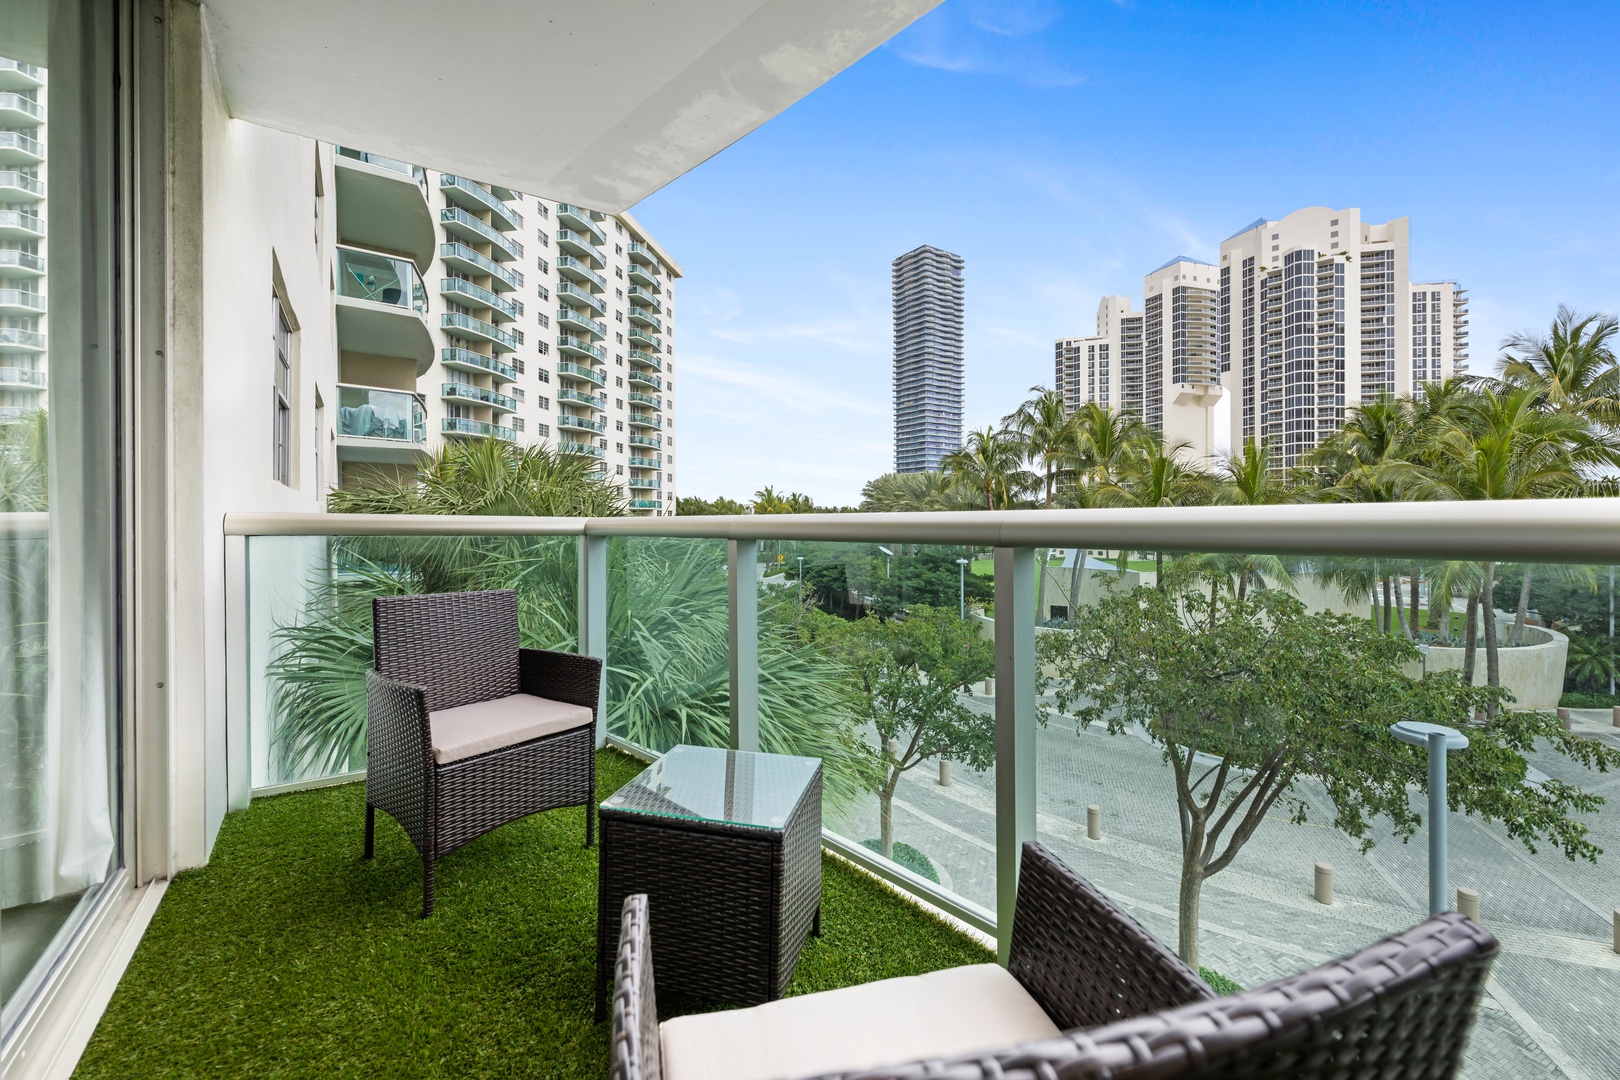 Step out onto the balcony & relax with gorgeous views